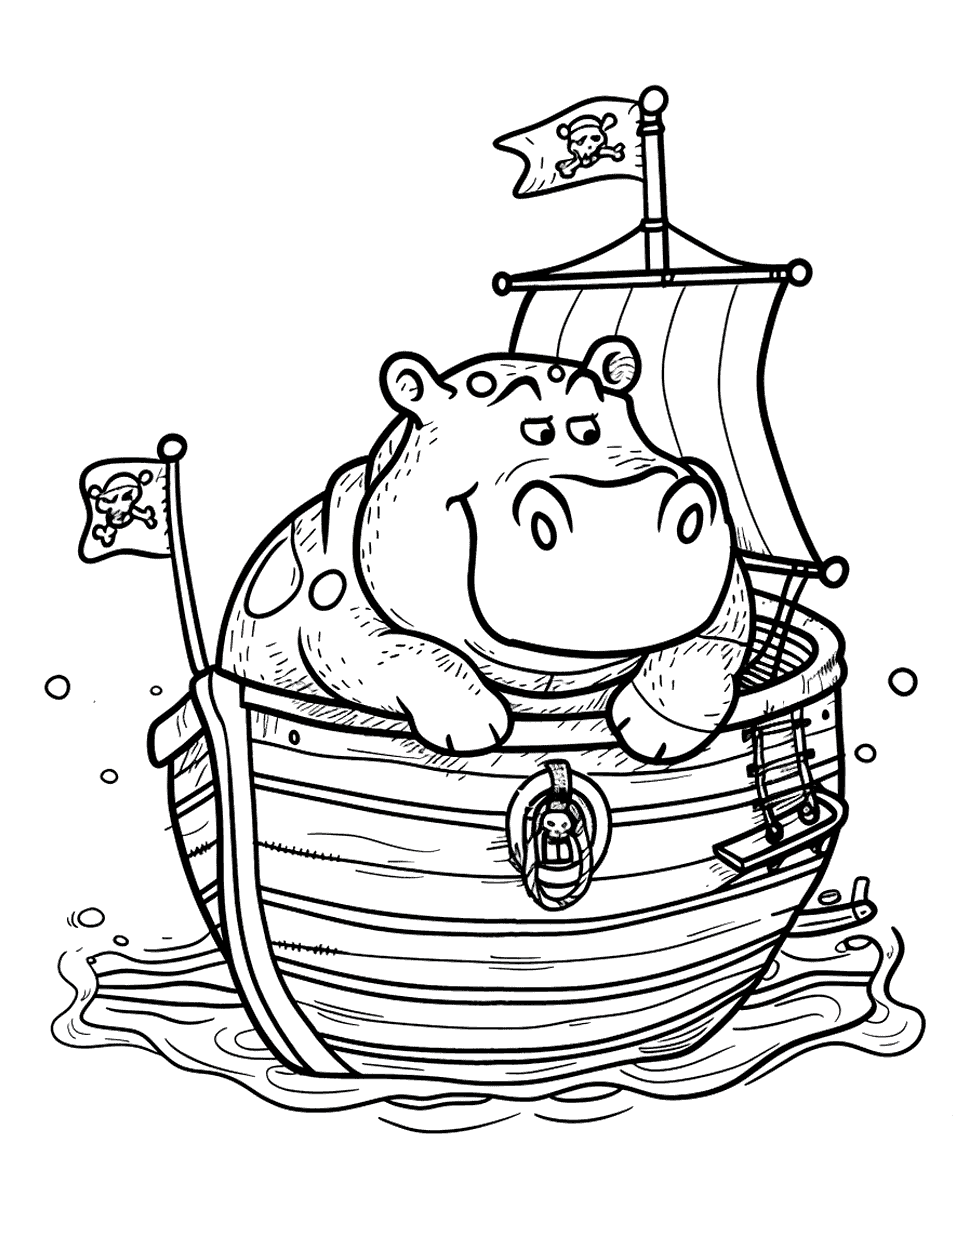 Hippo Pirate Adventure Coloring Page - A hippo sailing the high seas on a pirate ship, searching for treasure.